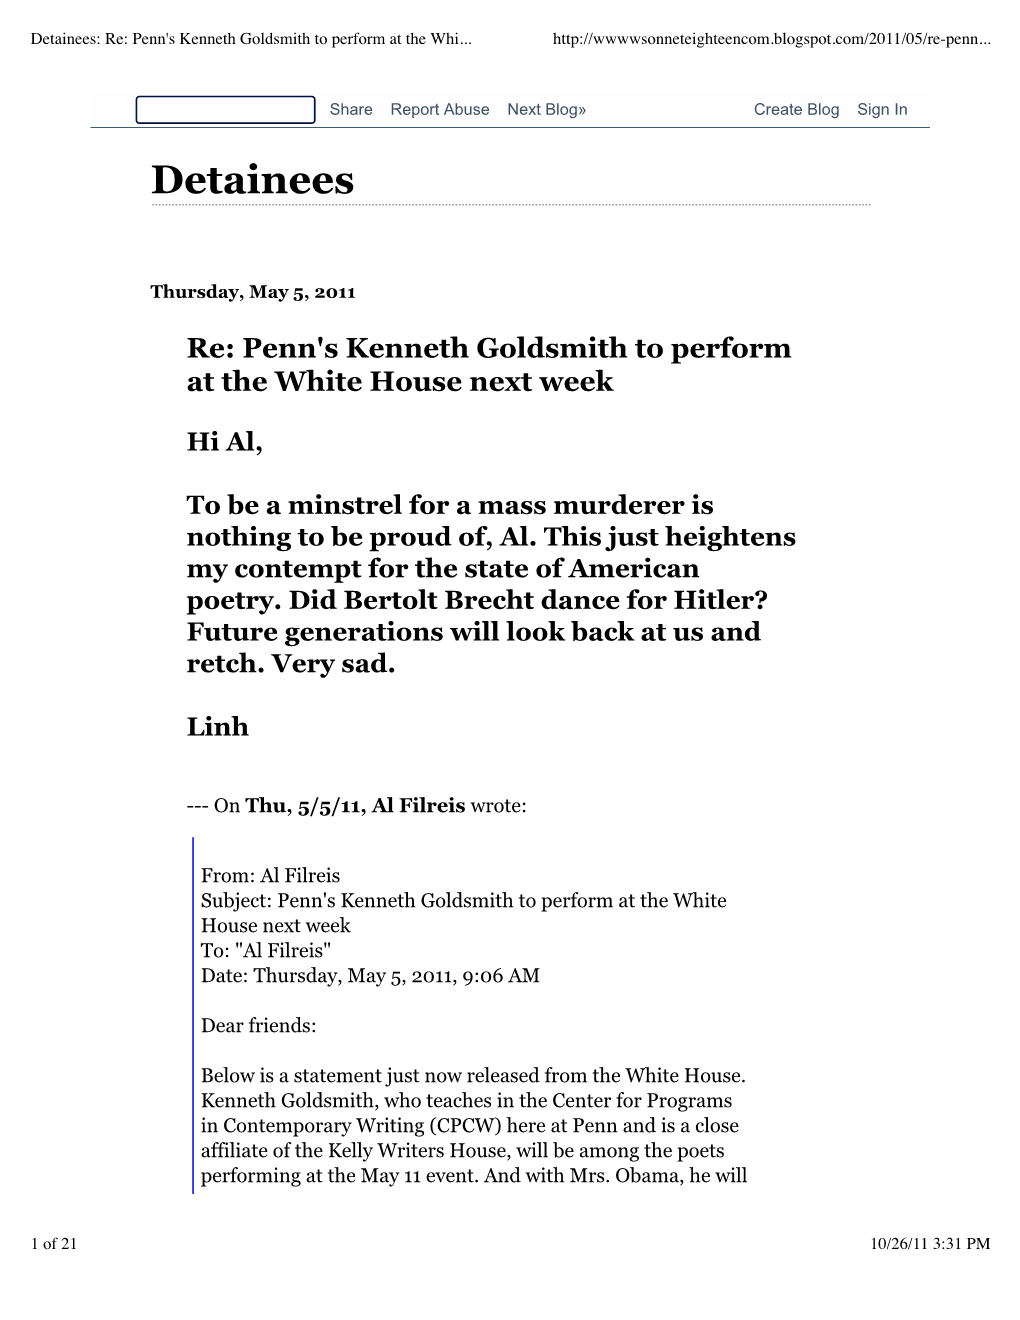 Detainees: Re: Penn's Kenneth Goldsmith to Perform at the White